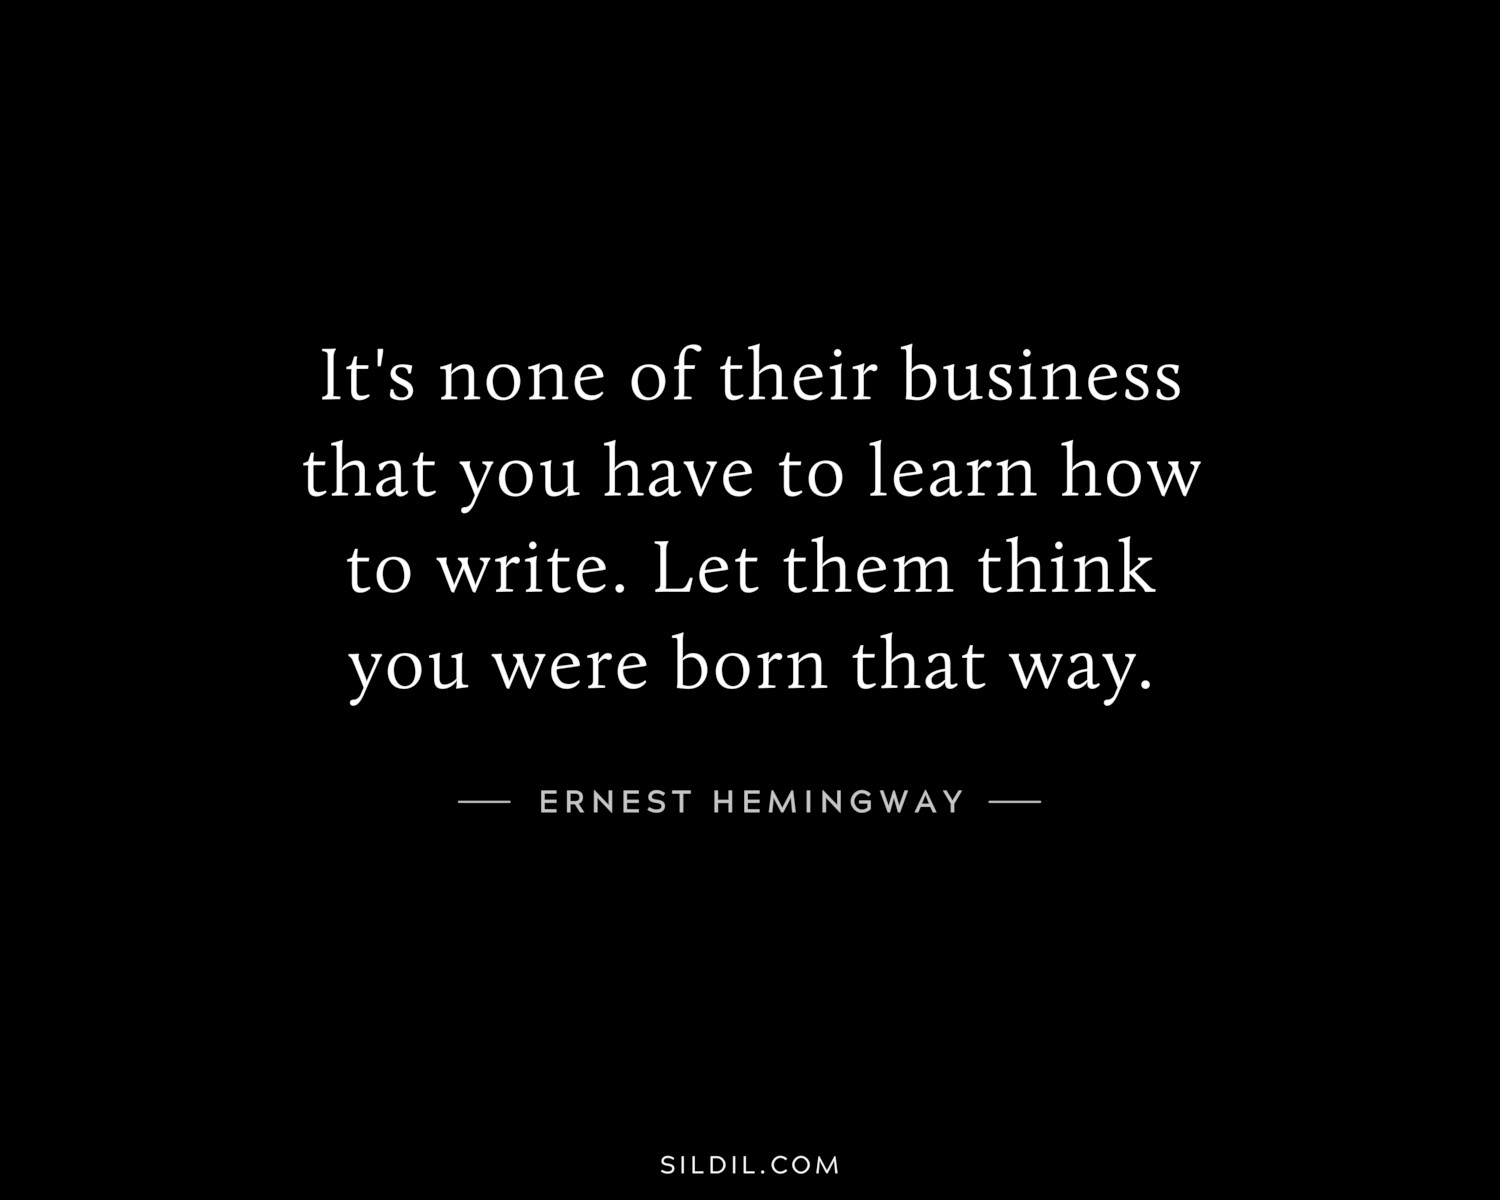 It's none of their business that you have to learn how to write. Let them think you were born that way.